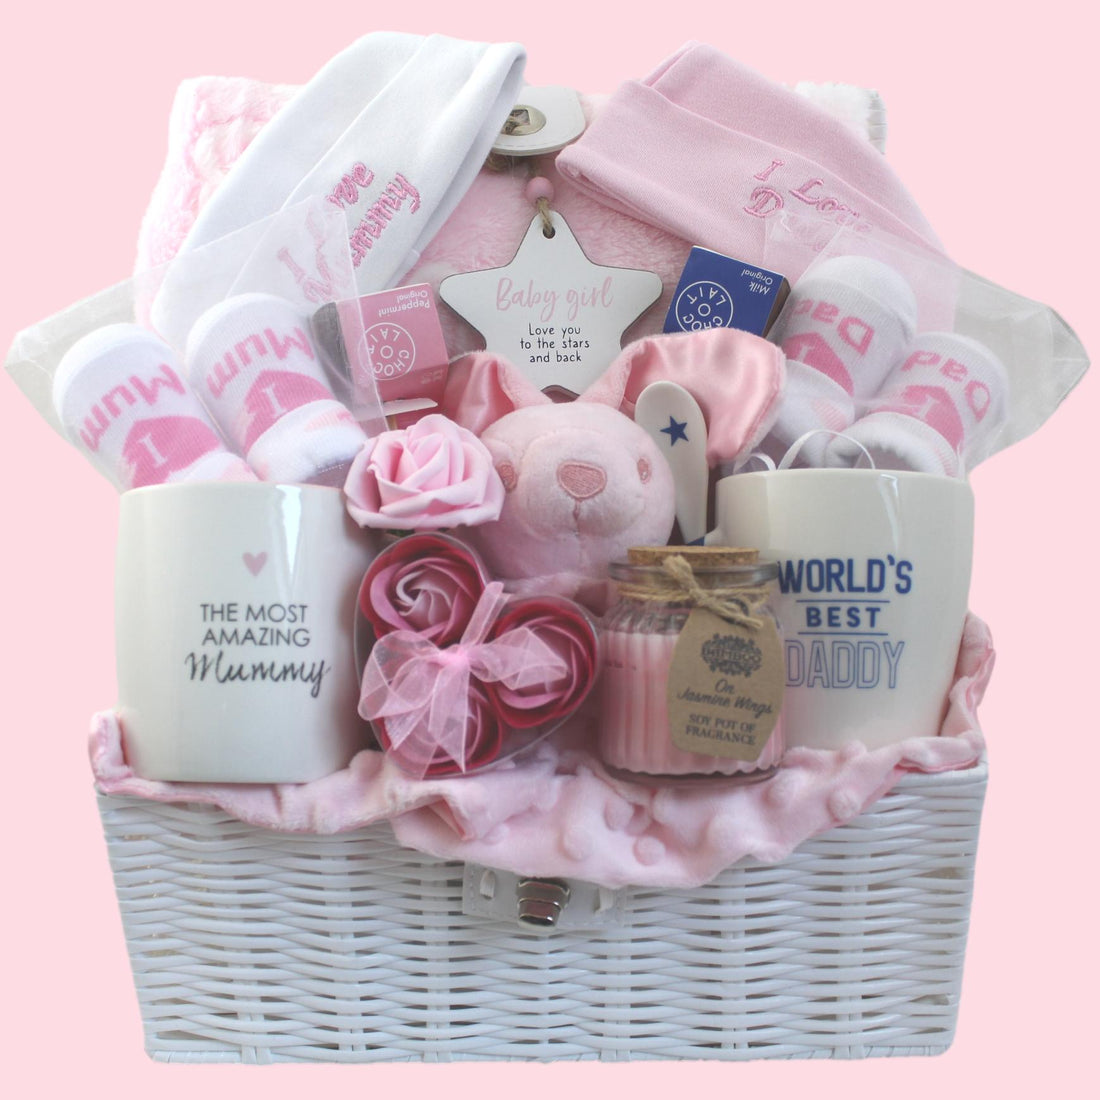 Mummy, Daddy and Baby Girl Pamper Hamper New Arrival